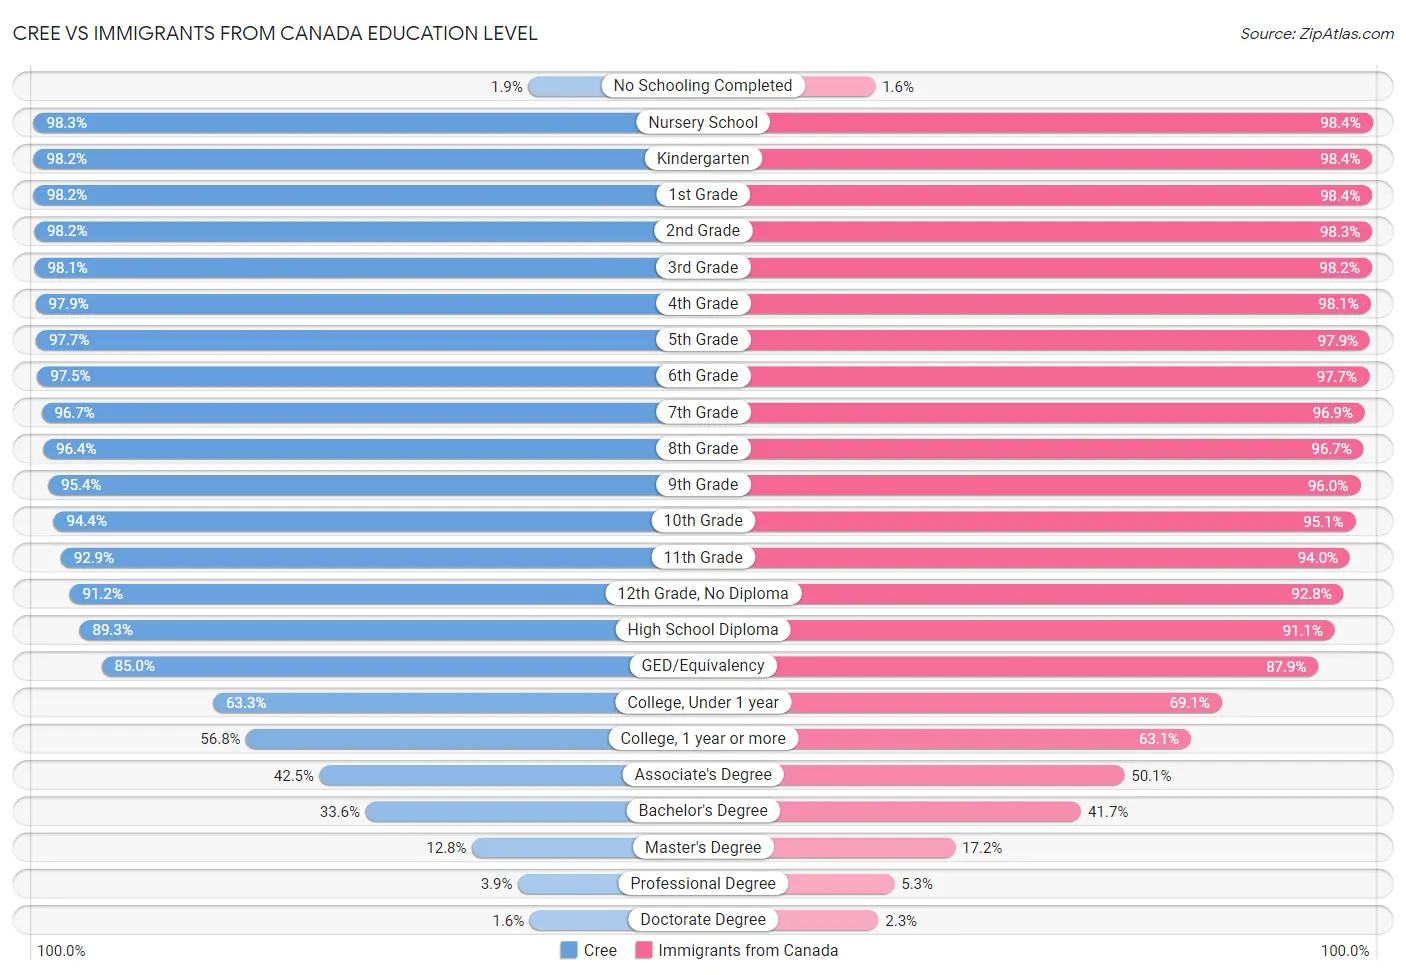 Cree vs Immigrants from Canada Education Level